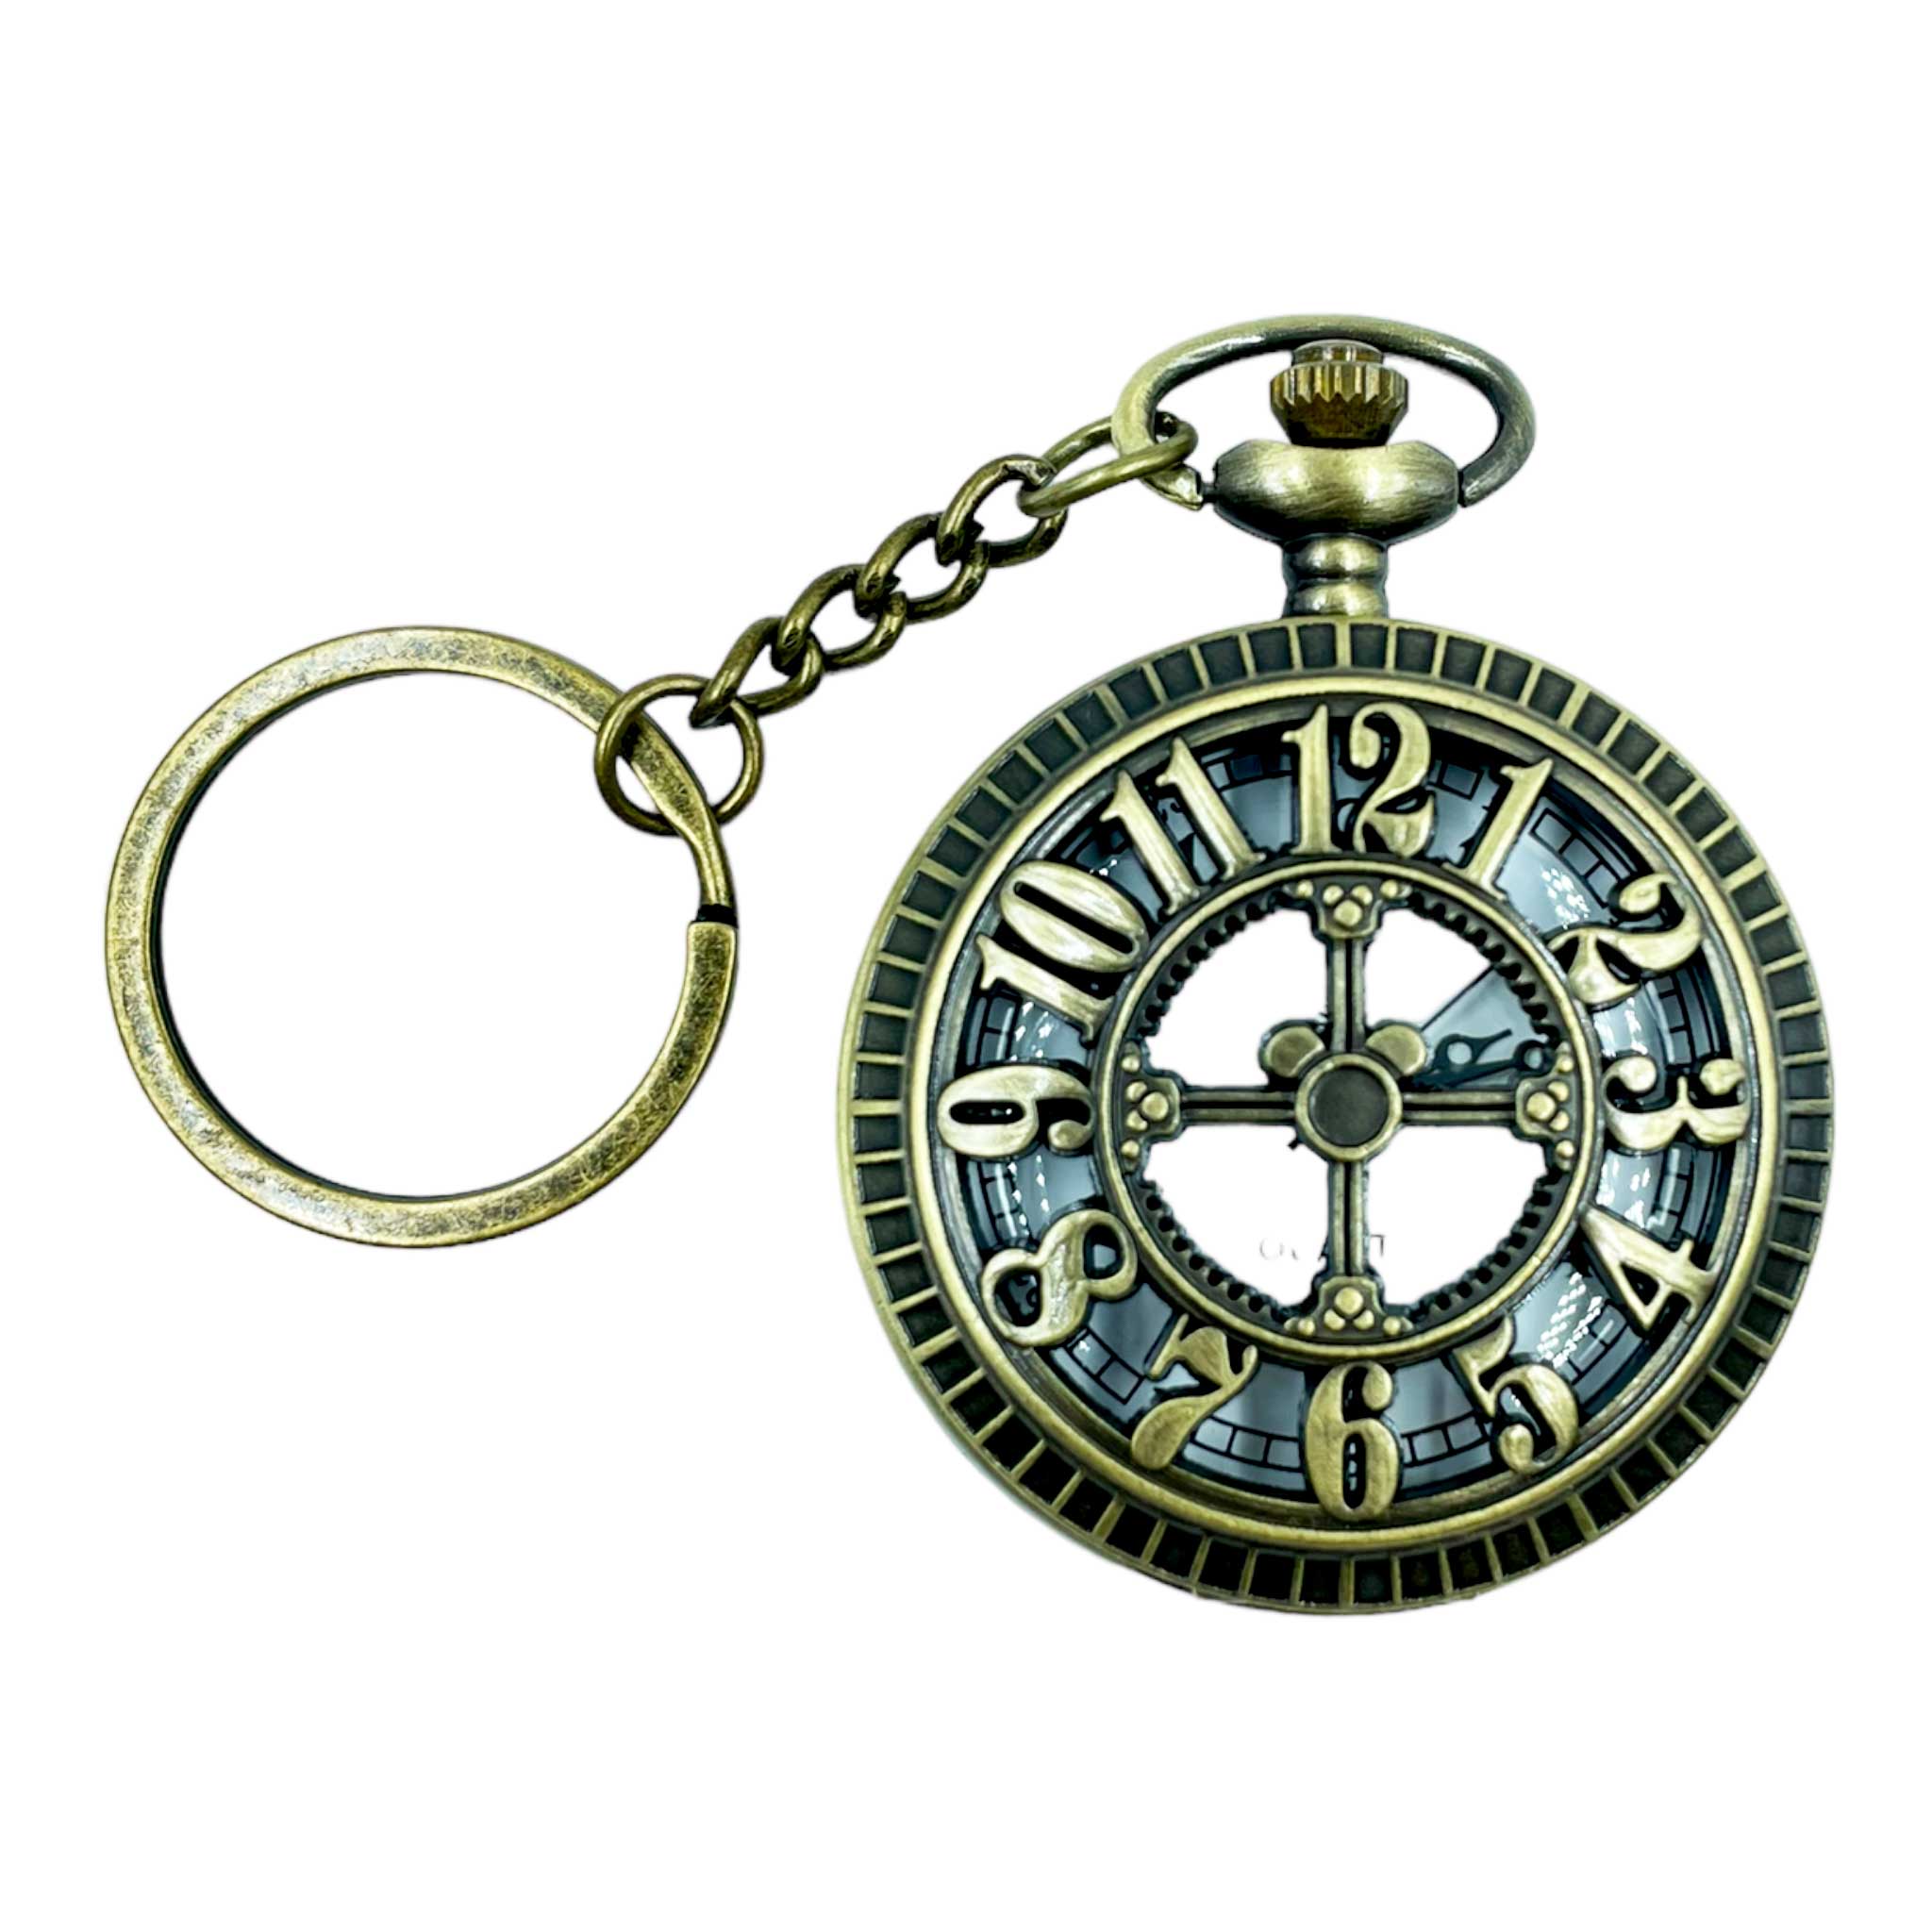 Vintage,fun,blue,red Pencils,keyring or Pocket Watch,working,battery  Operated.japan Movt. - Etsy